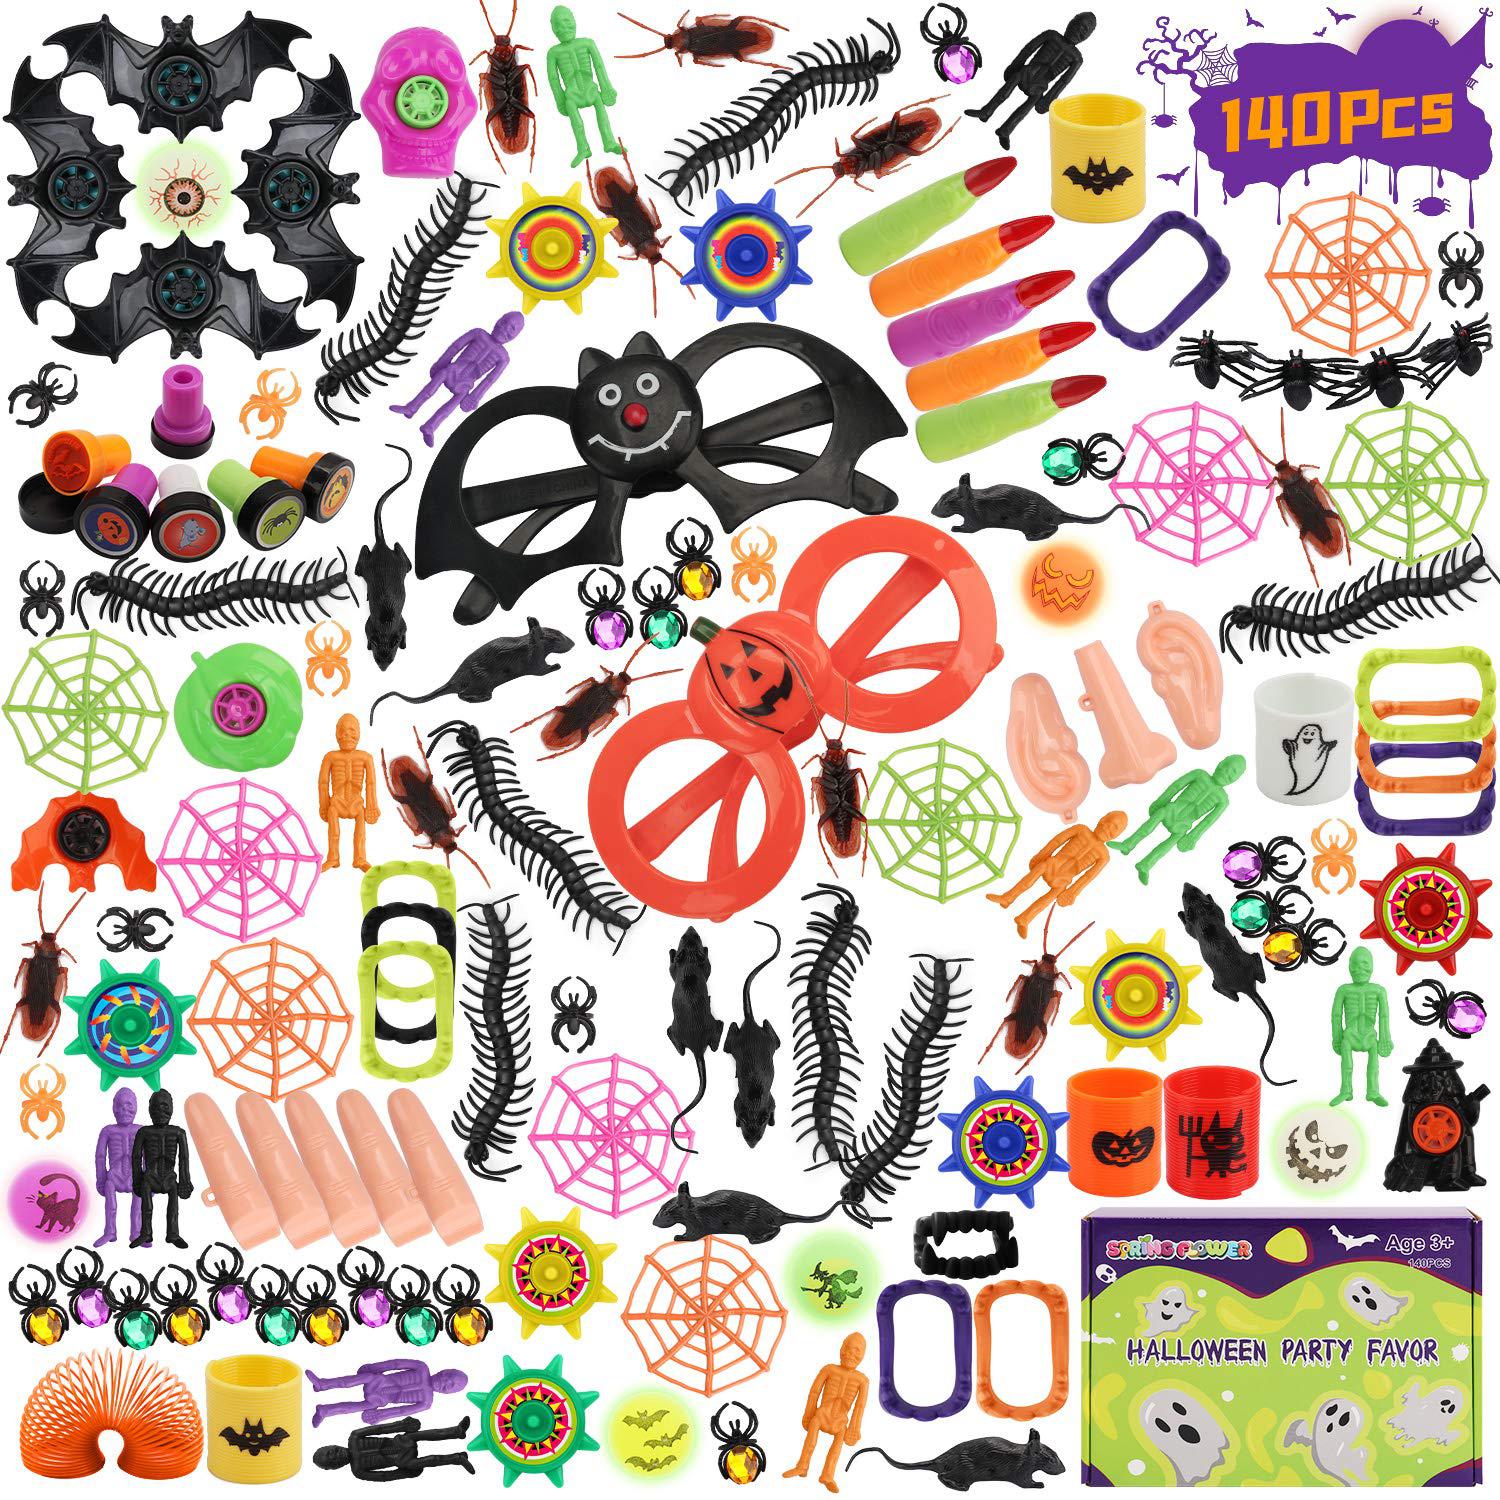 springflower 140 pieces halloween toys assortment for halloween party favors, carnival prizes,school classroom rewards, trick